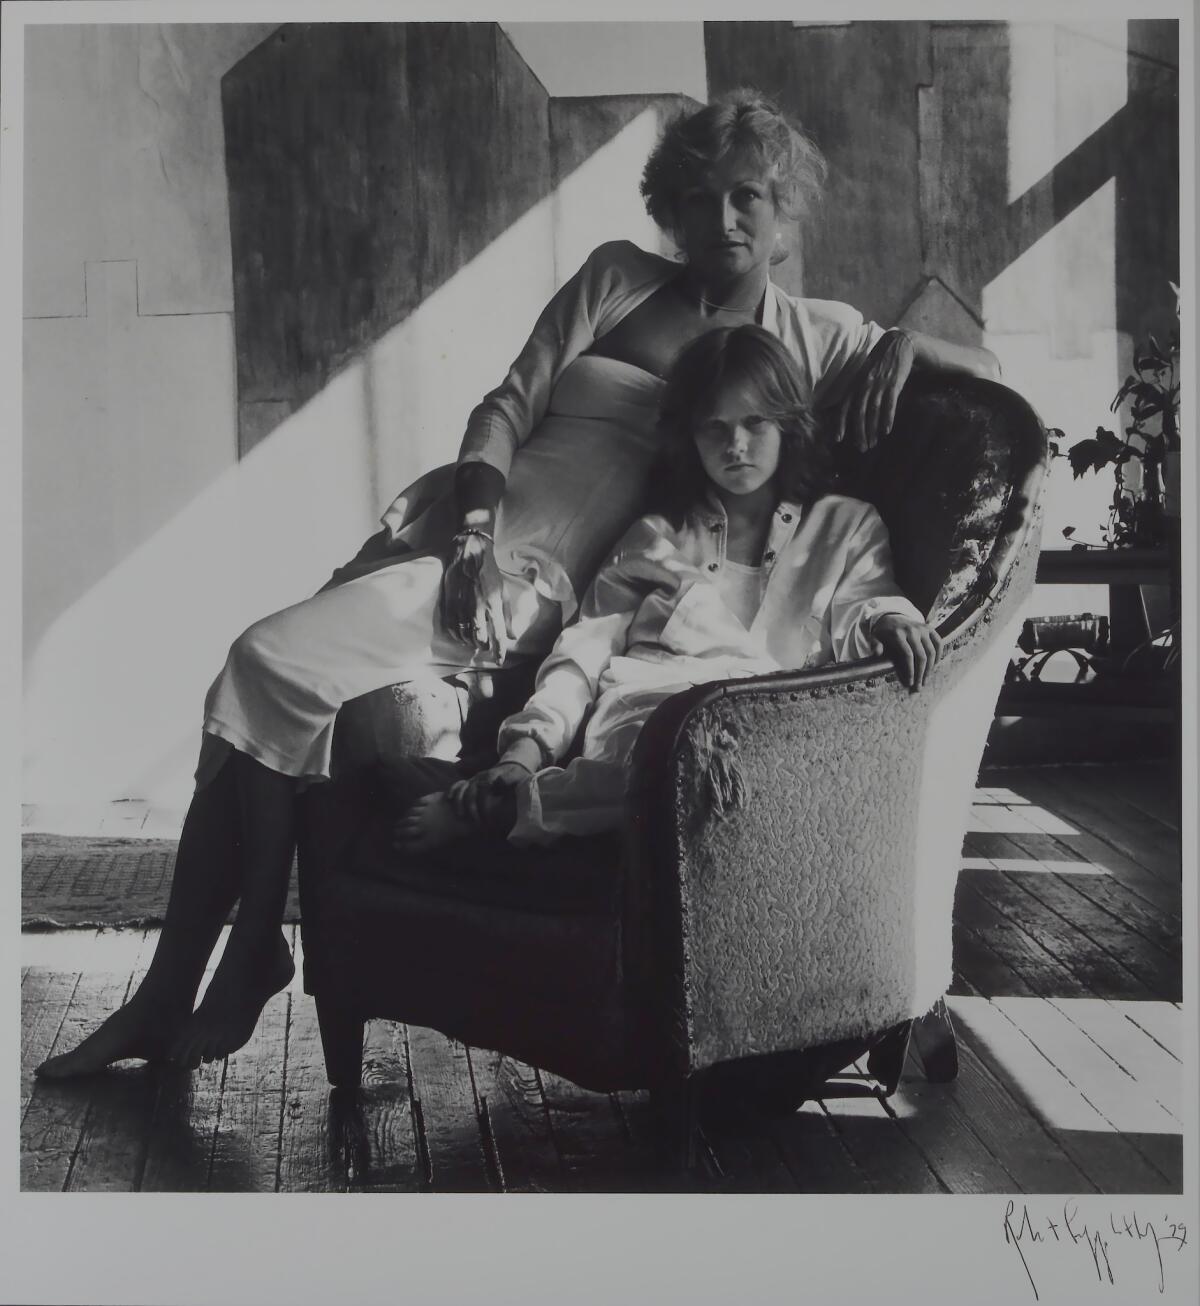 Andes Hruby and her mother, Eve, whom Robert Mapplethorpe like to call Eva. (Robert Mapplethorpe Foundation, used by permission)